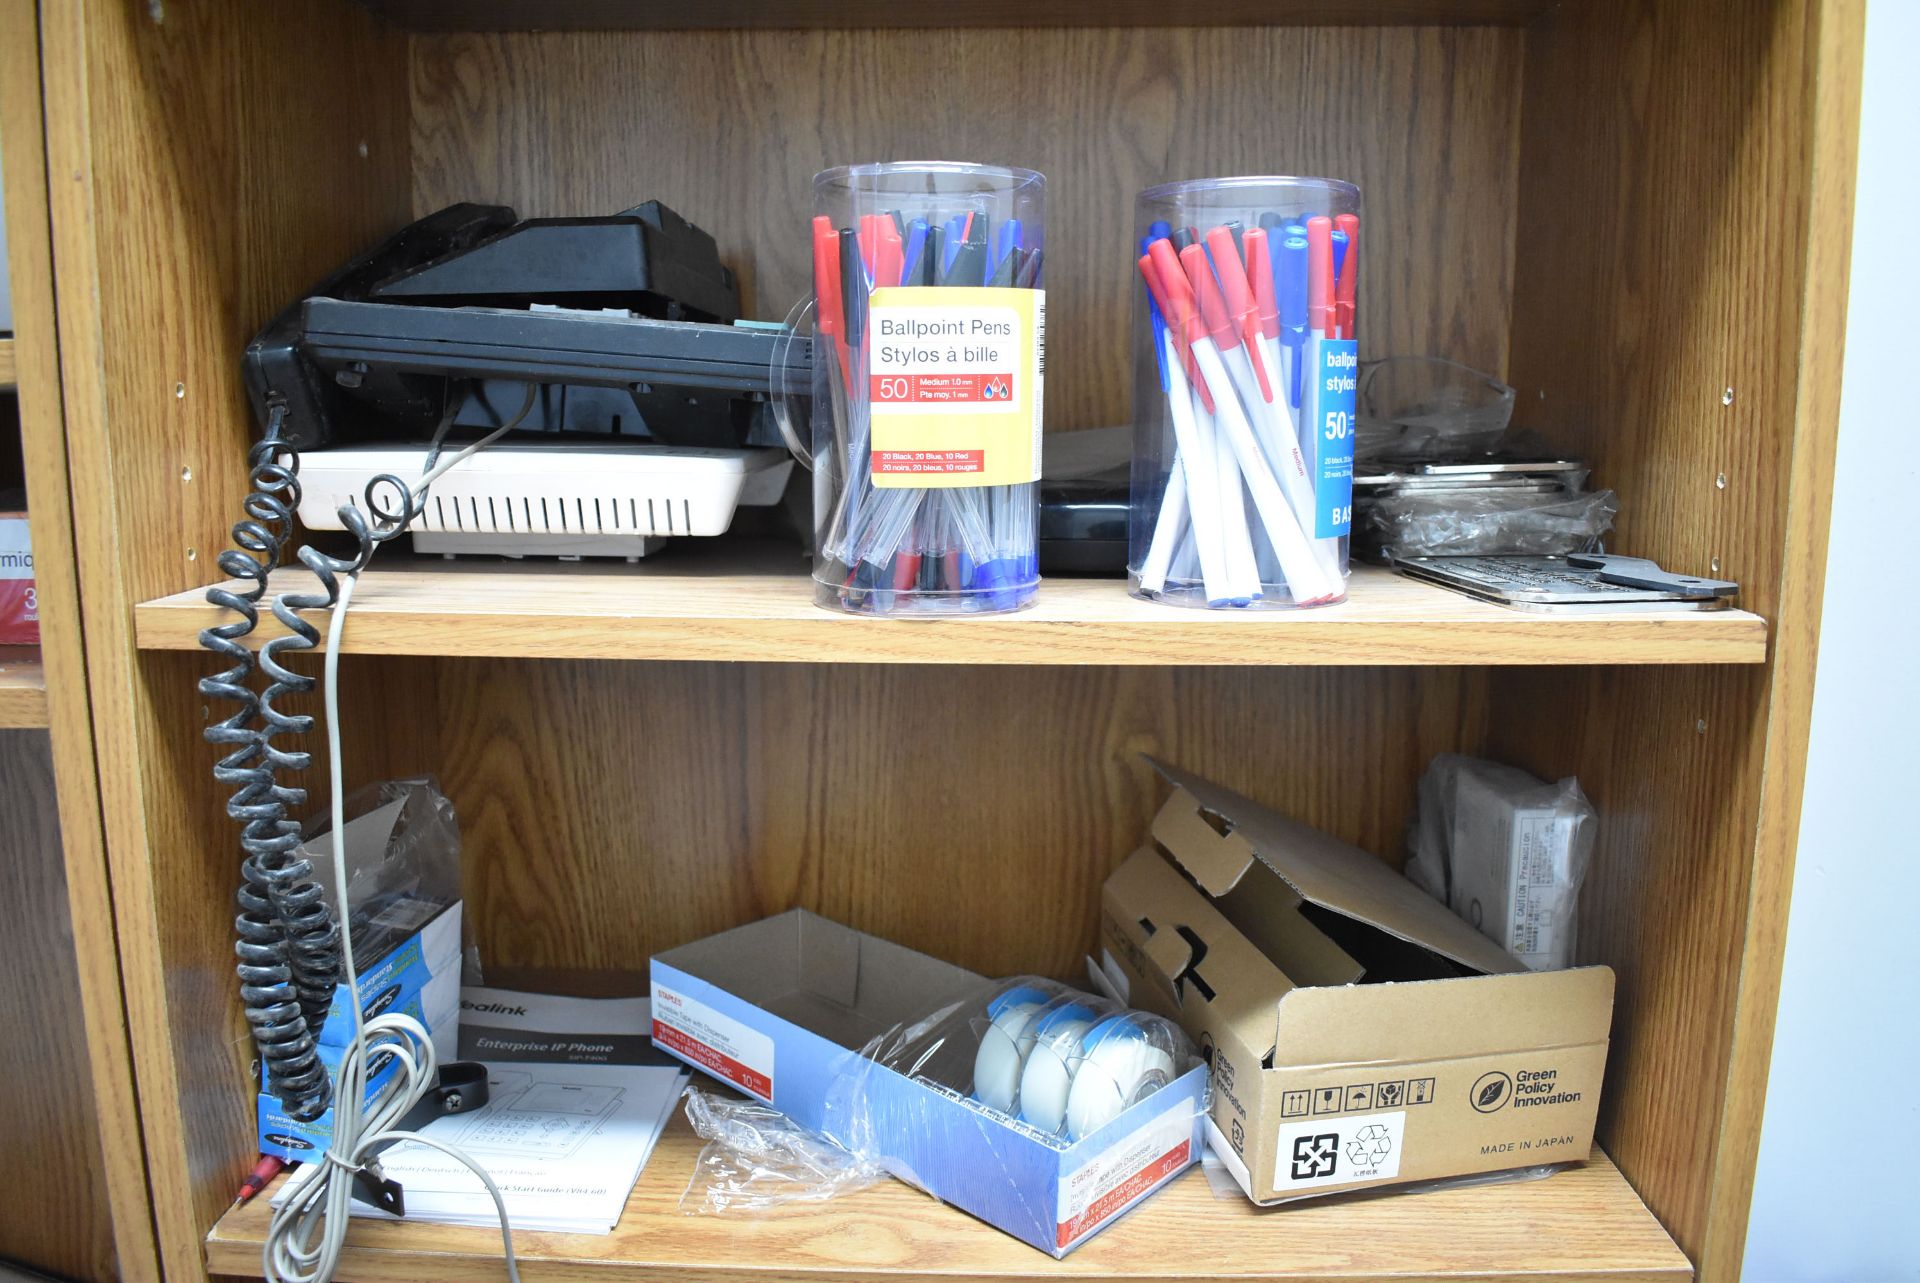 LOT/ CONTENTS OF SUPPLY CLOSET - INCLUIDNG OFFICE SUPPLIES, CLEANING SUPPLIES, SHELVES - Image 3 of 6